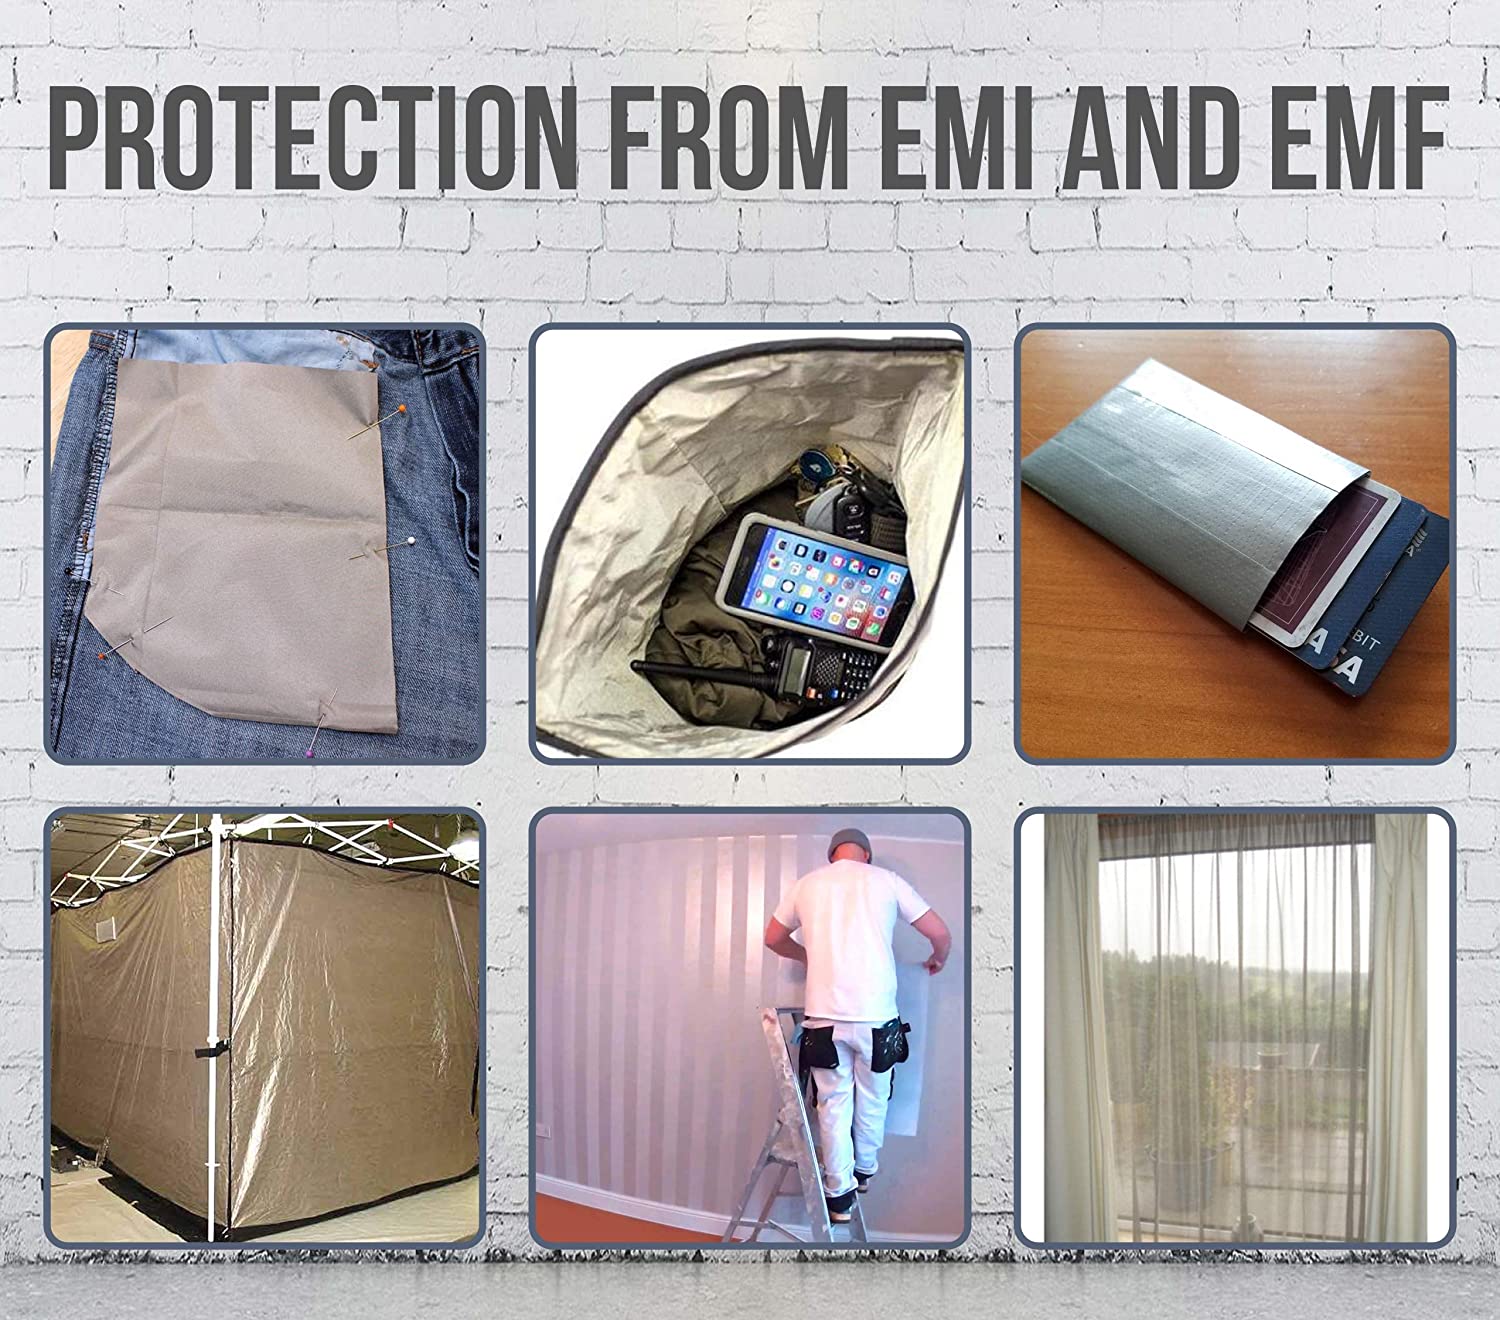 The Best EMF Production - Faraday Fabric for Protection - Realyou